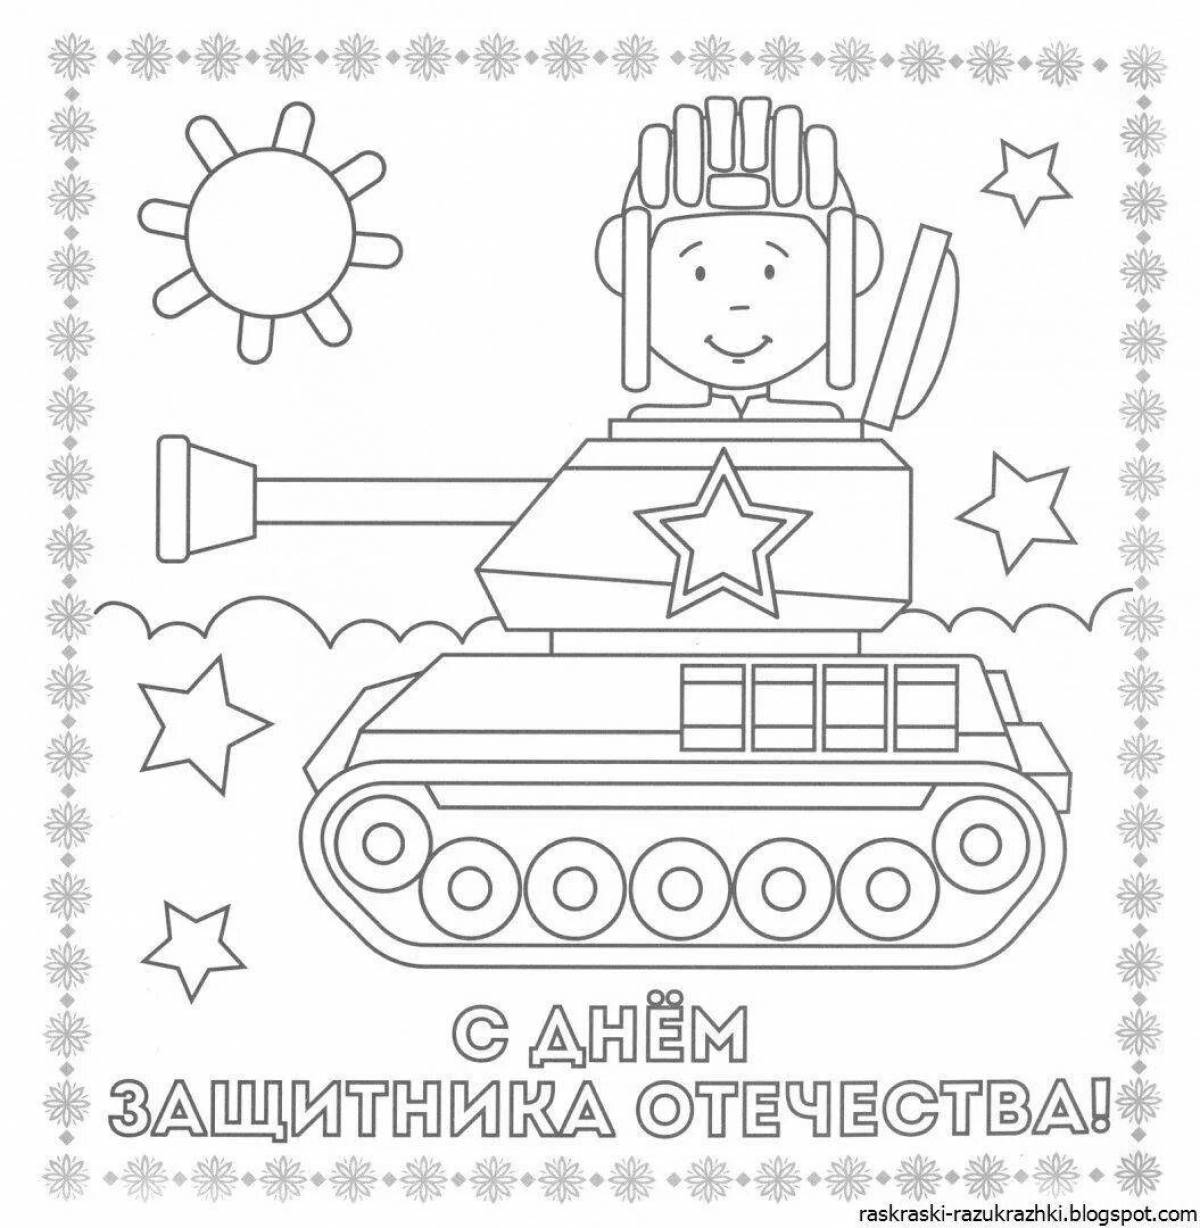 Cheerful drawing sheet for Defender of the Fatherland Day